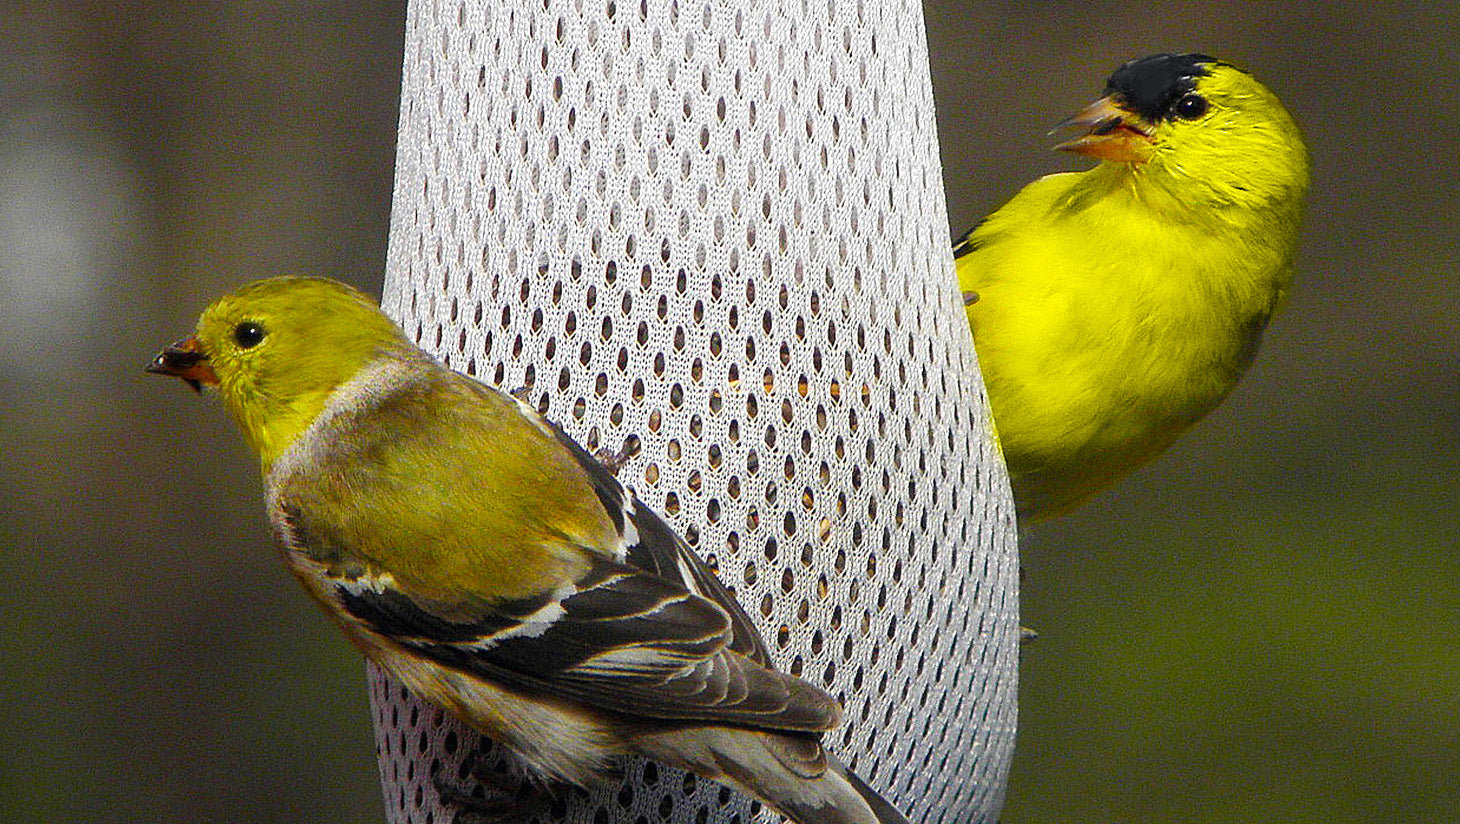 Yellow finch eating seed and hanging onto a Nyjer seed filled feeding sock